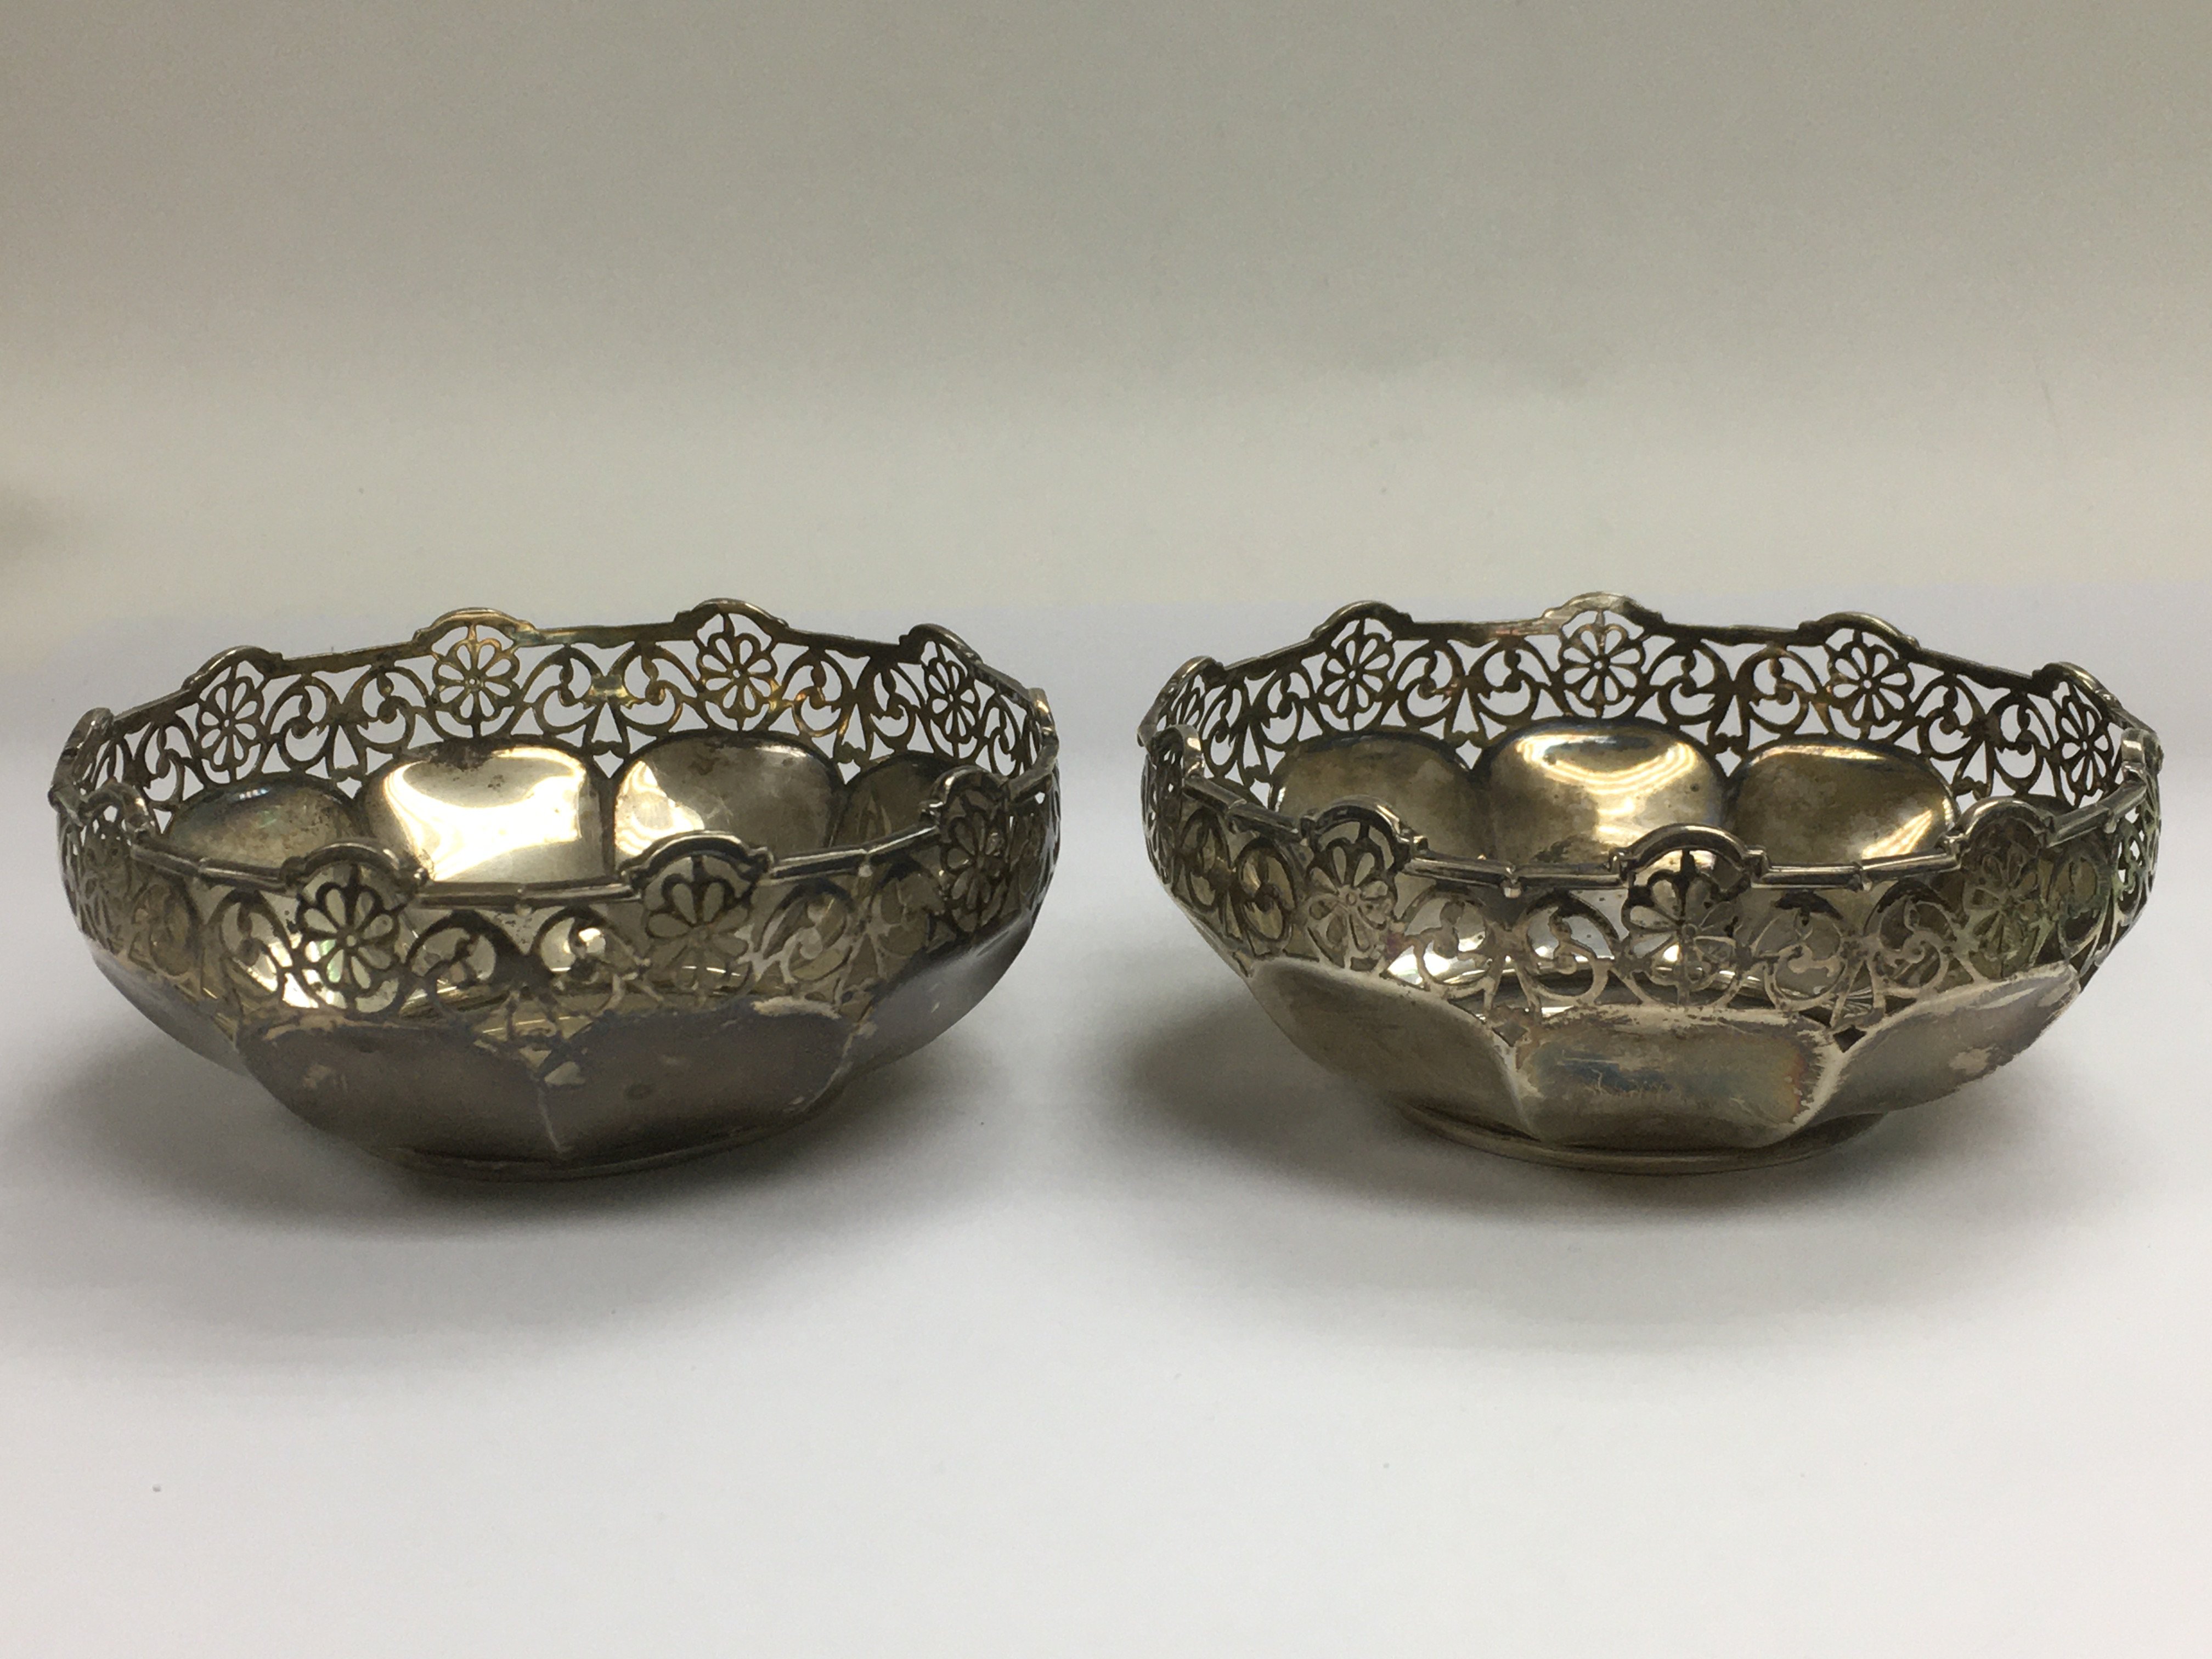 A pair of silver dishes with piercework decoration